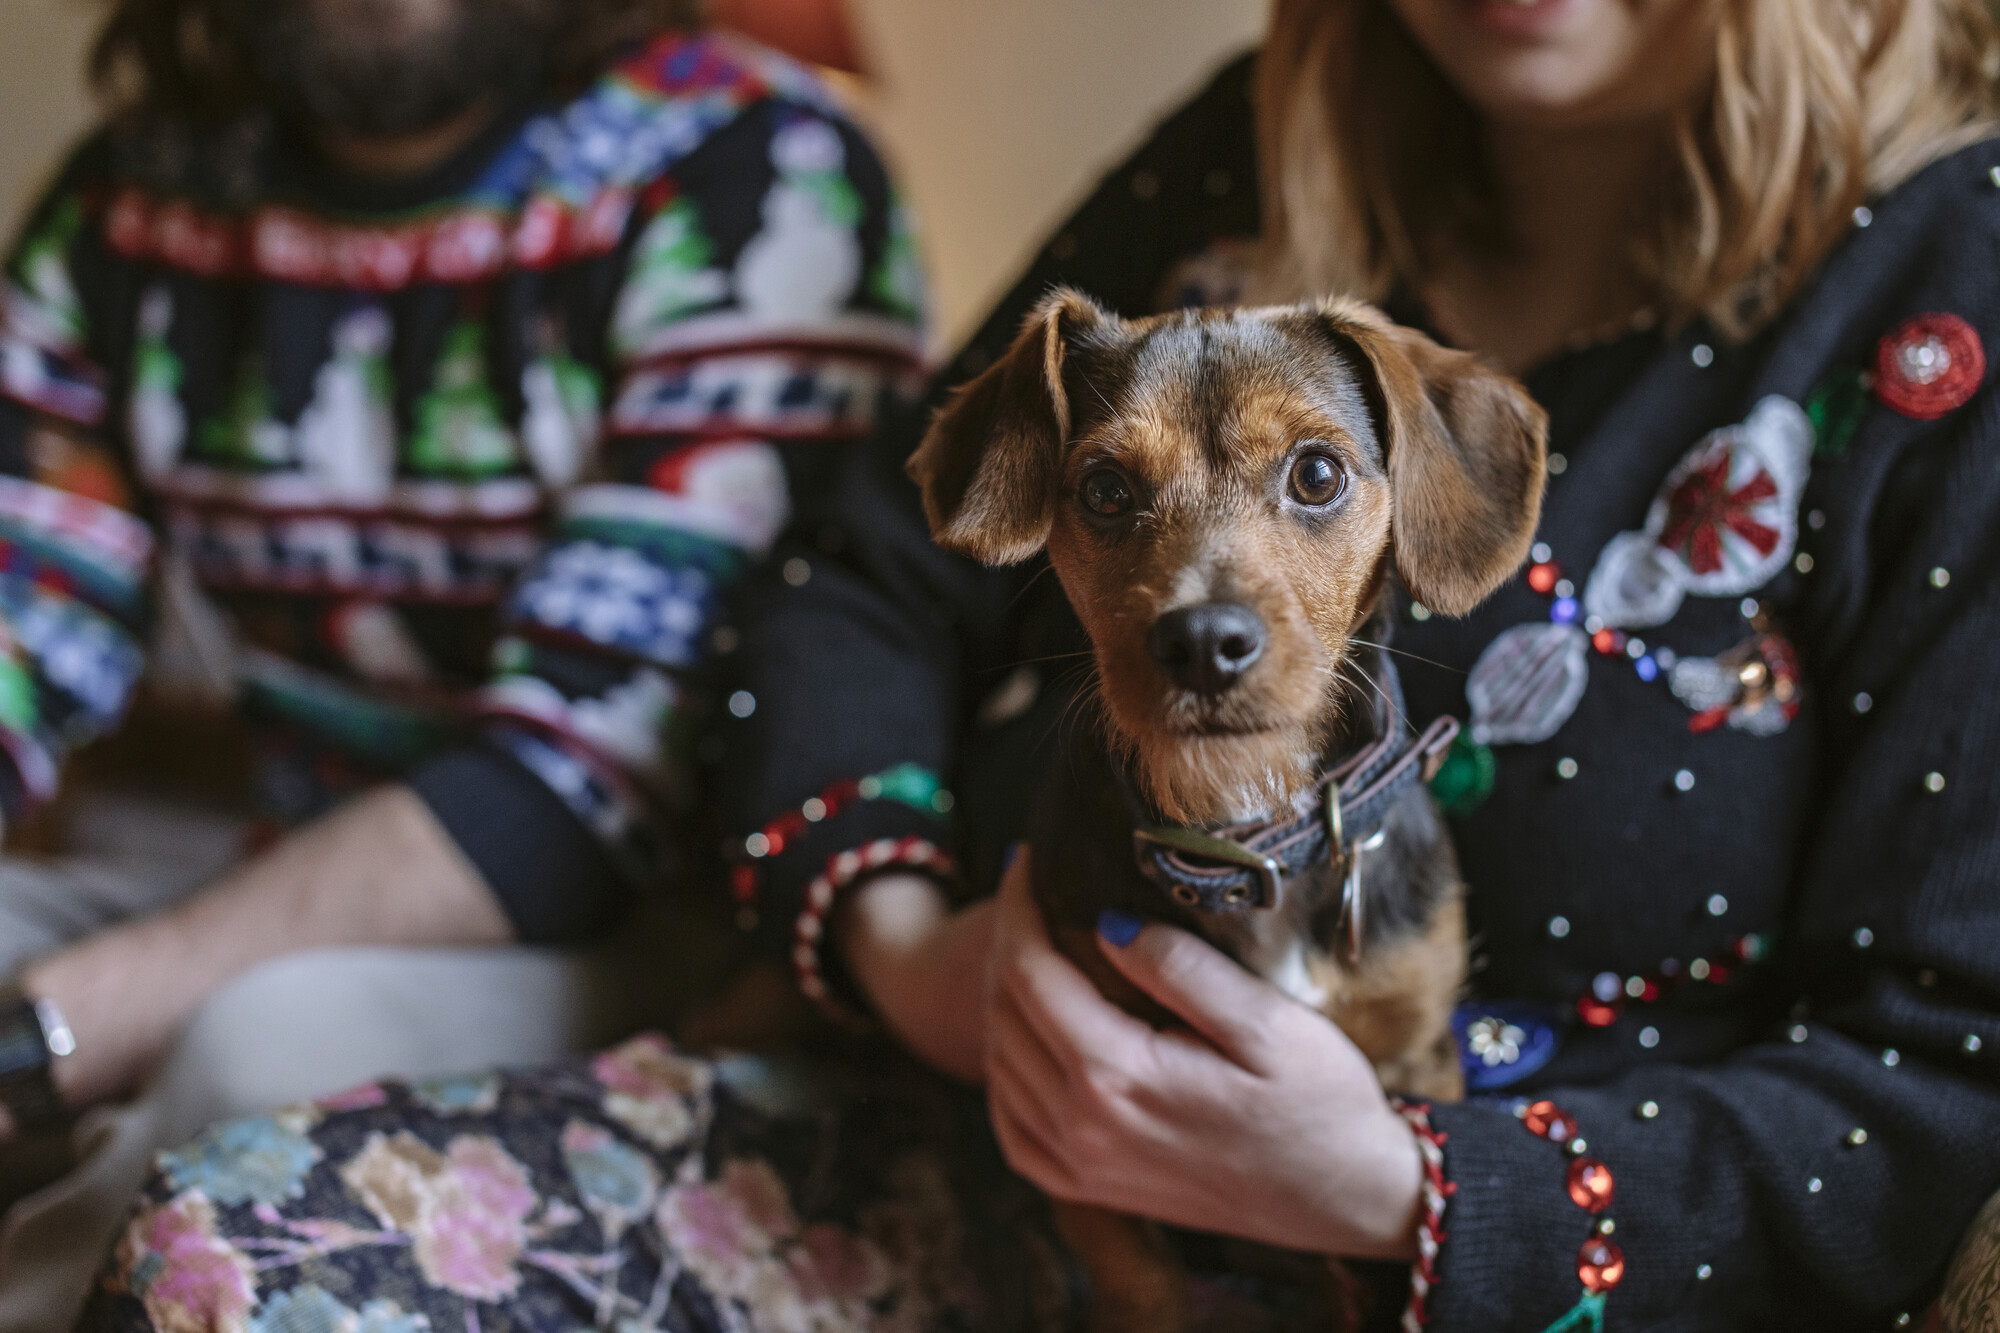 Bernard sitting with his owners, who are wearing Christmas jumpers